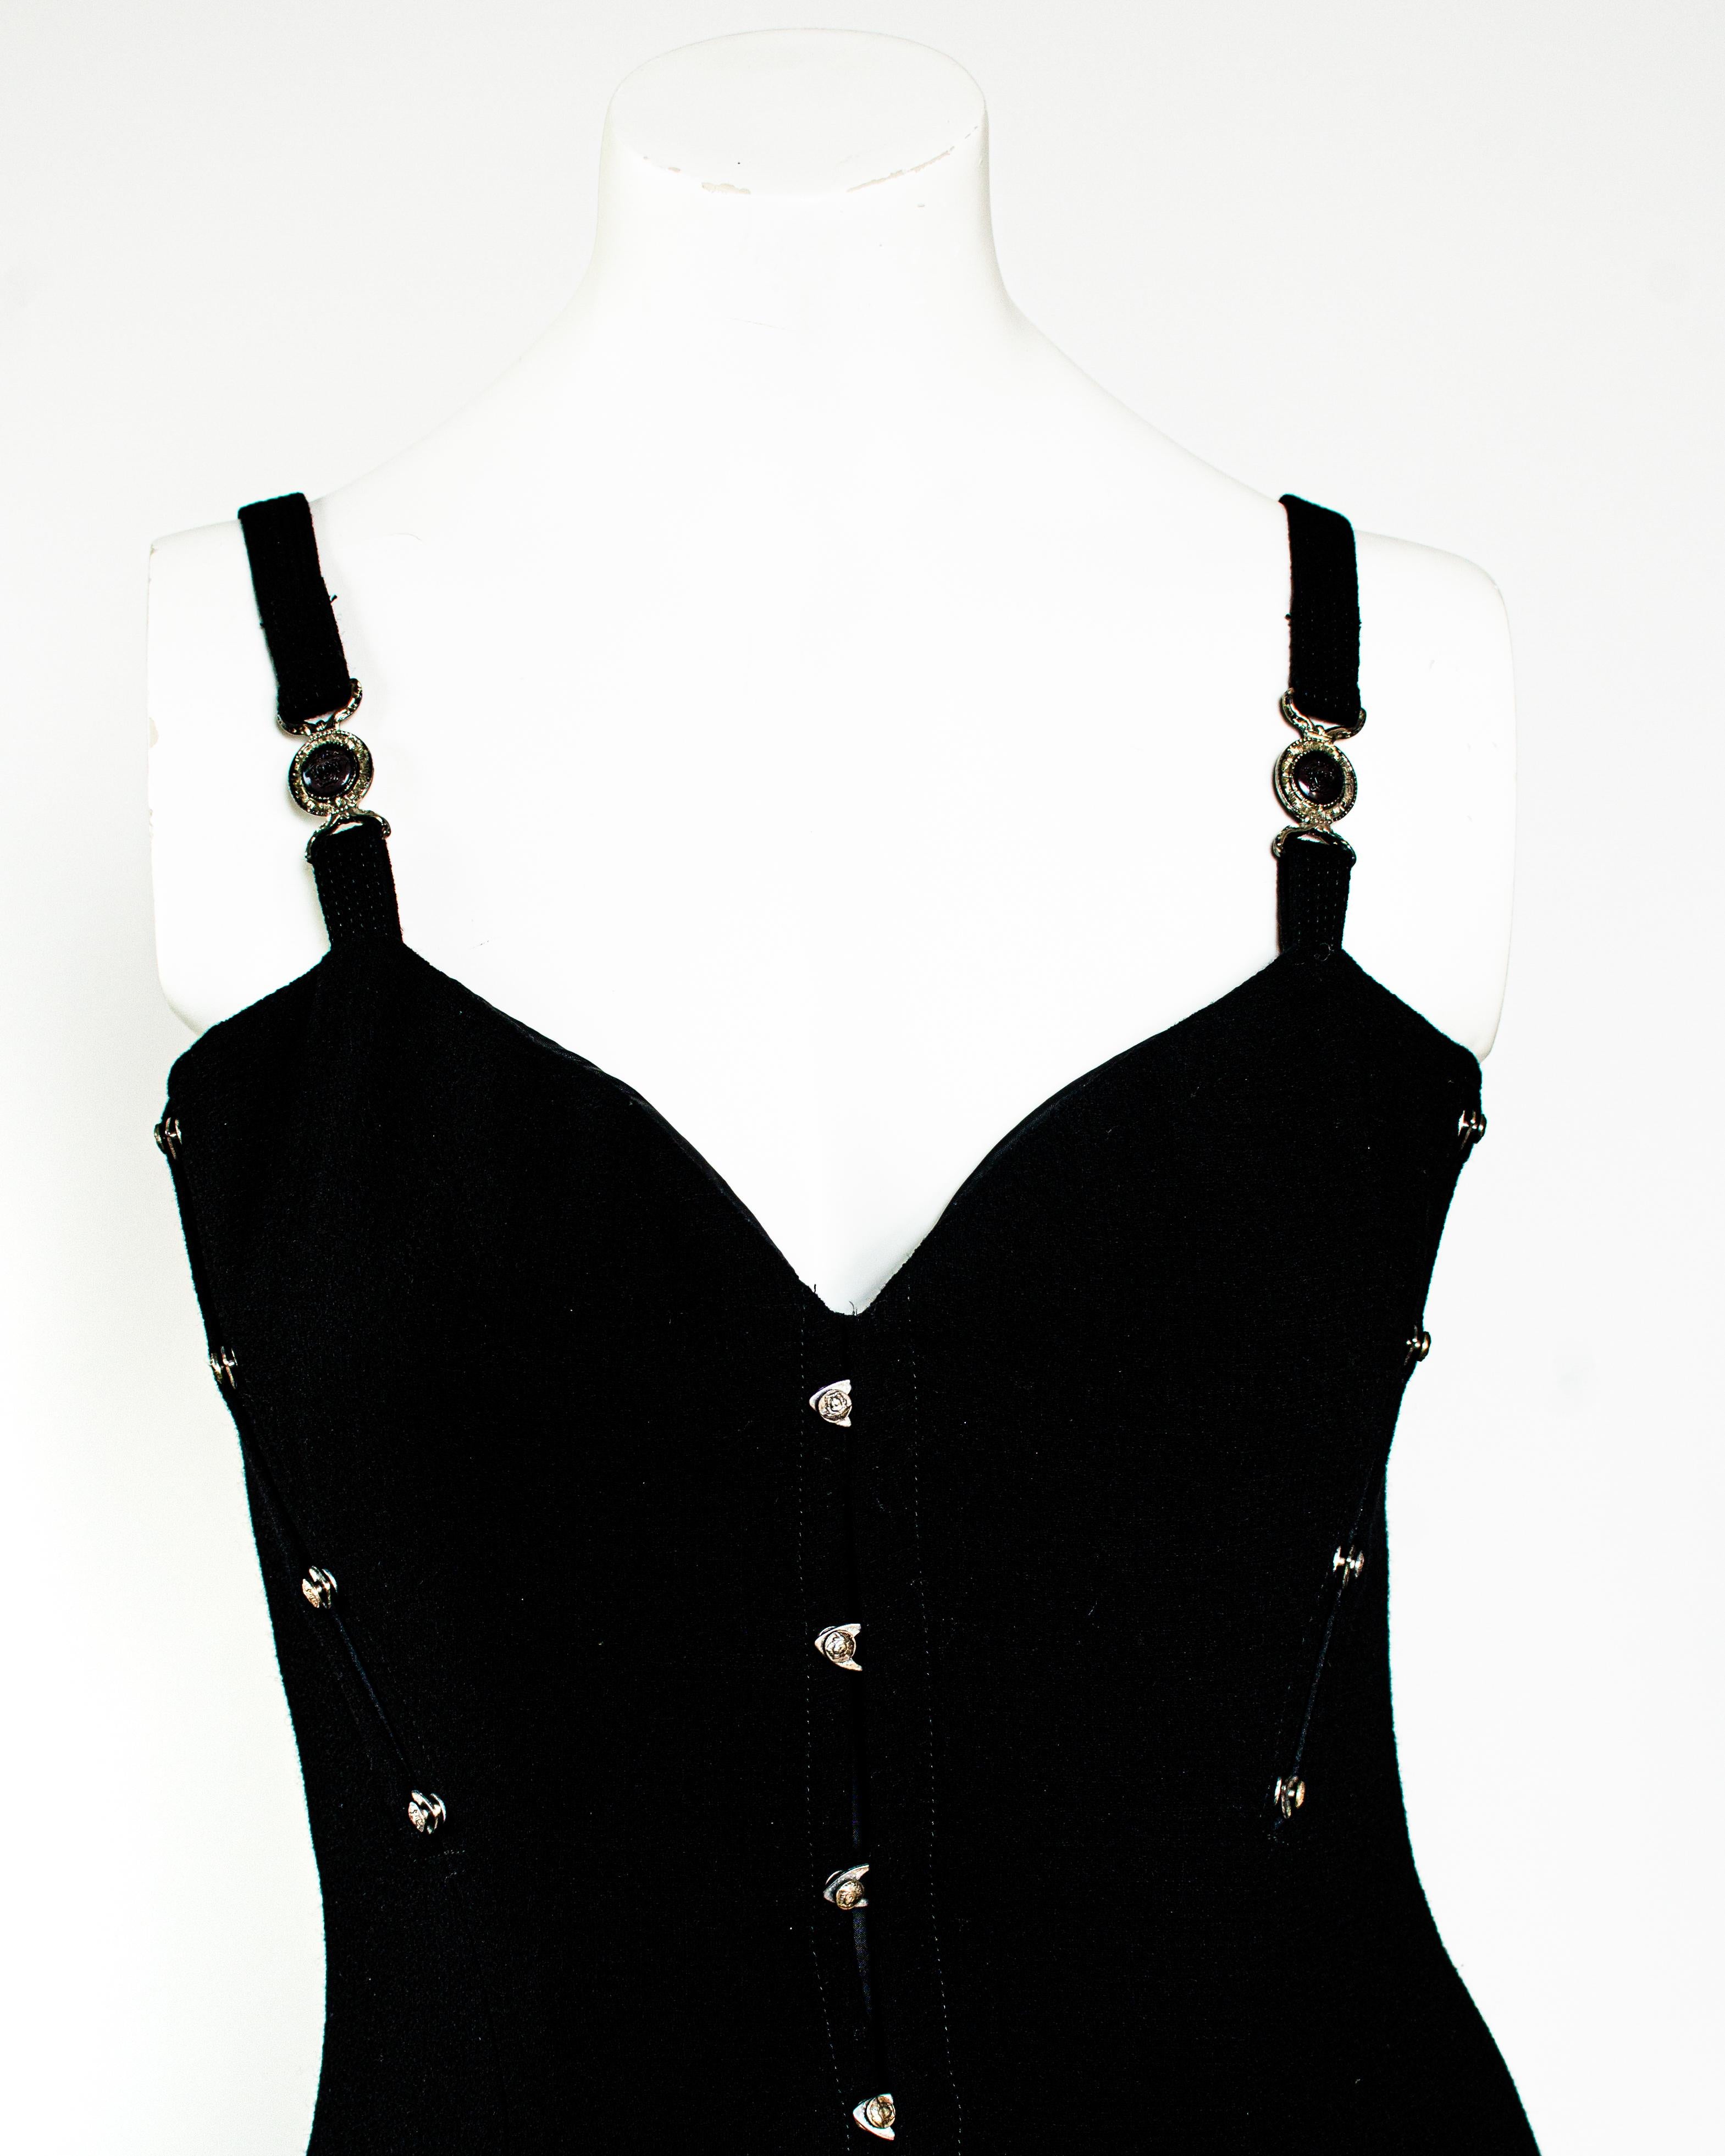 S/S 1995 Gianni Versace Couture Bustier Medusa Corset Boned Flare Black Dress  In Good Condition For Sale In West Hollywood, CA